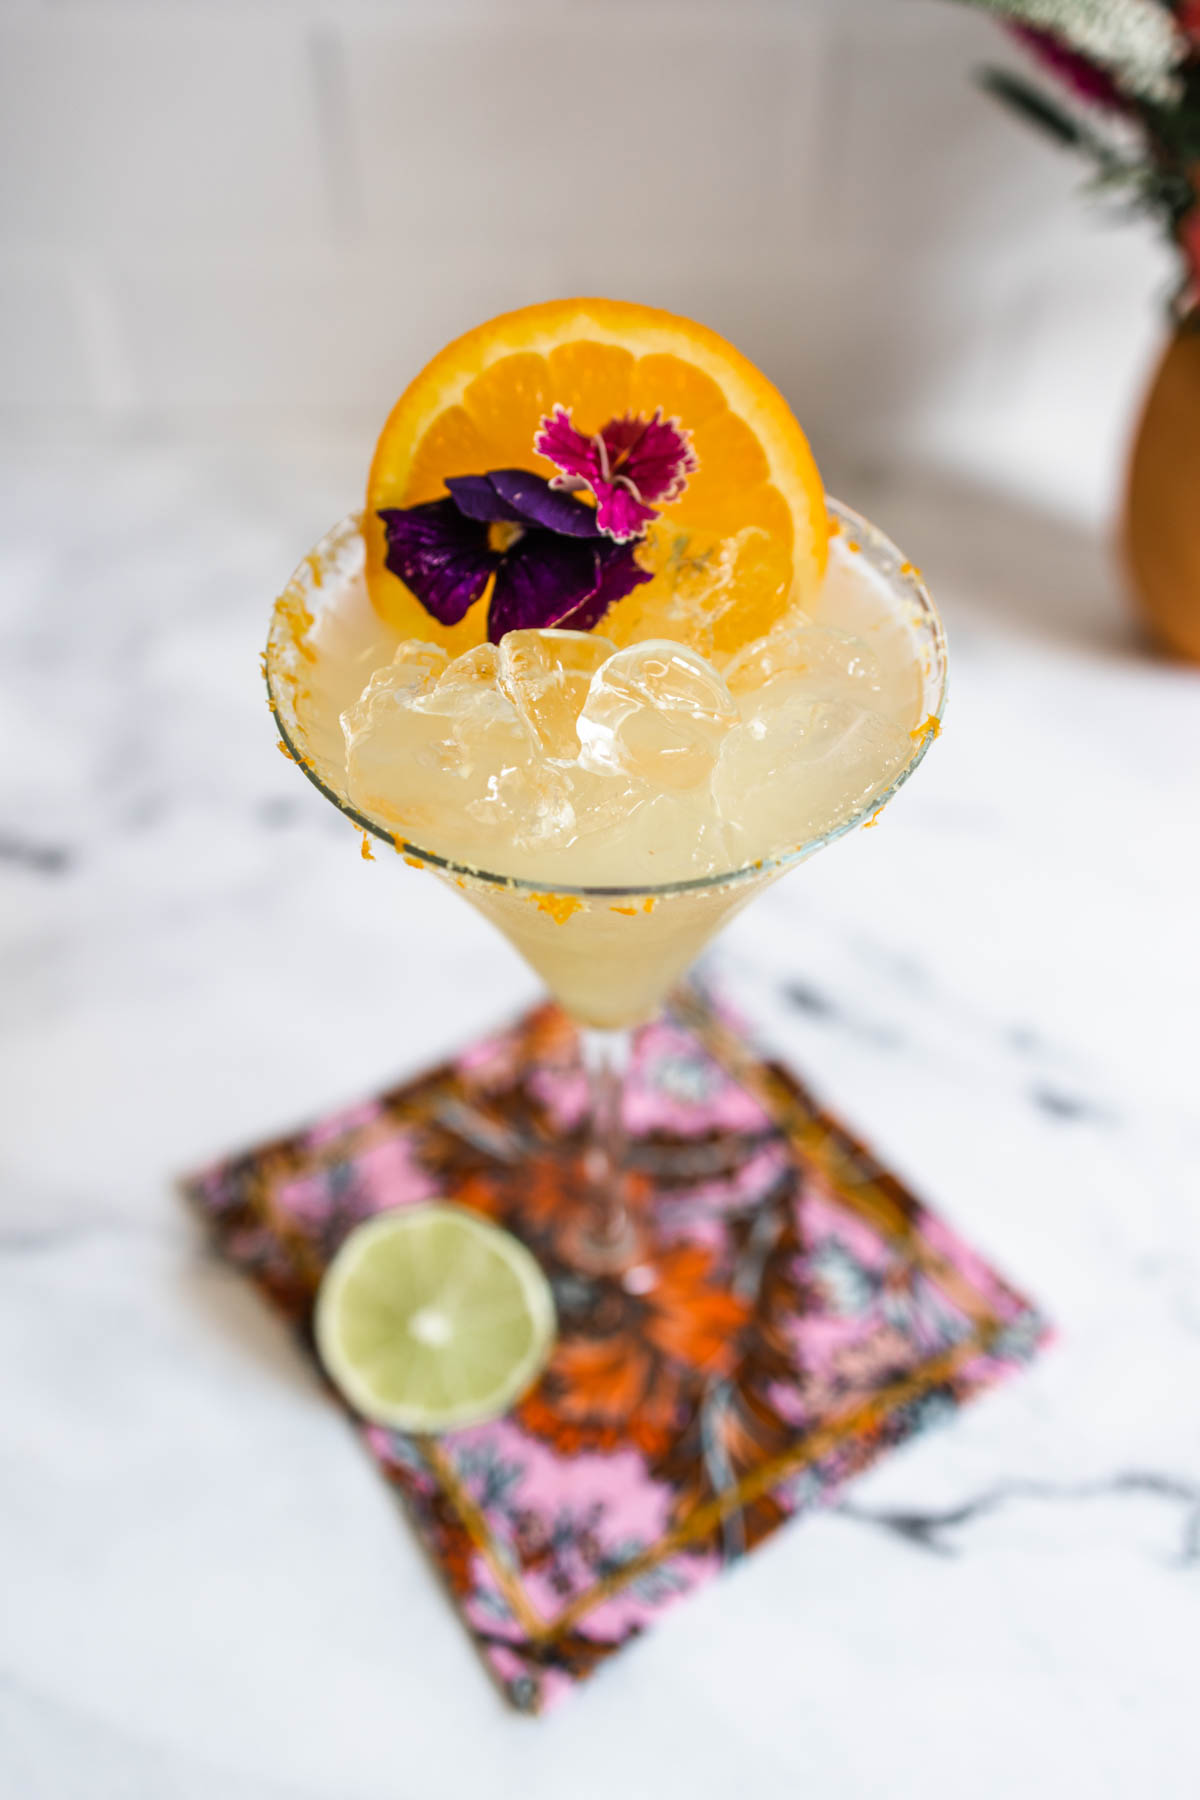 A close-up shot of Lillet margarita garnished with an orange slice and a red flower on top of a colorful napkin.